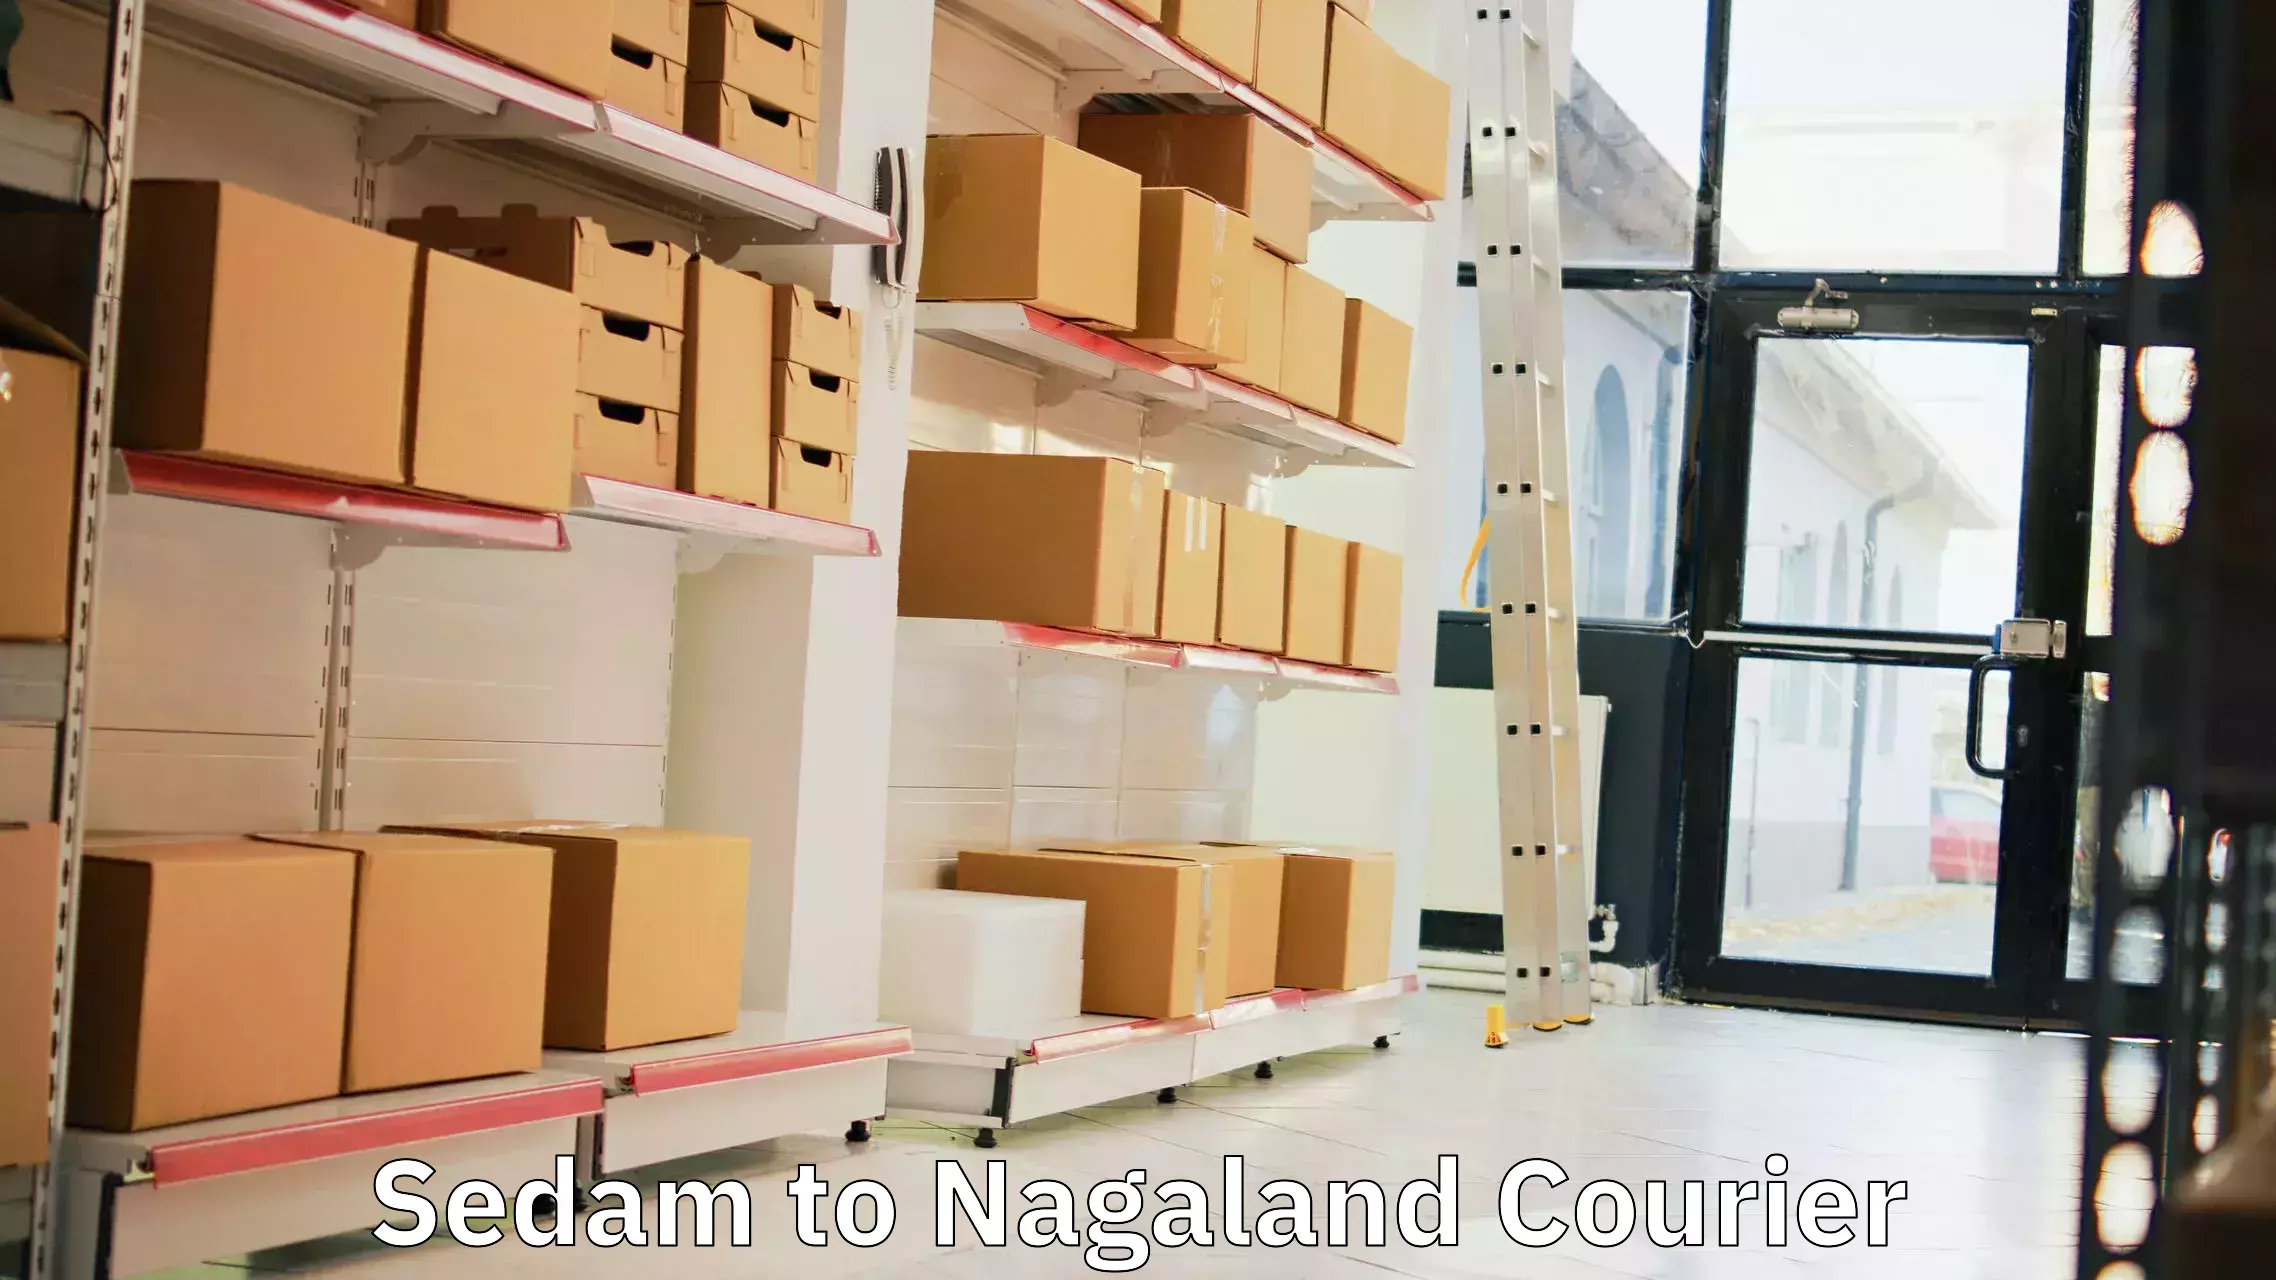 Express delivery capabilities in Sedam to Nagaland